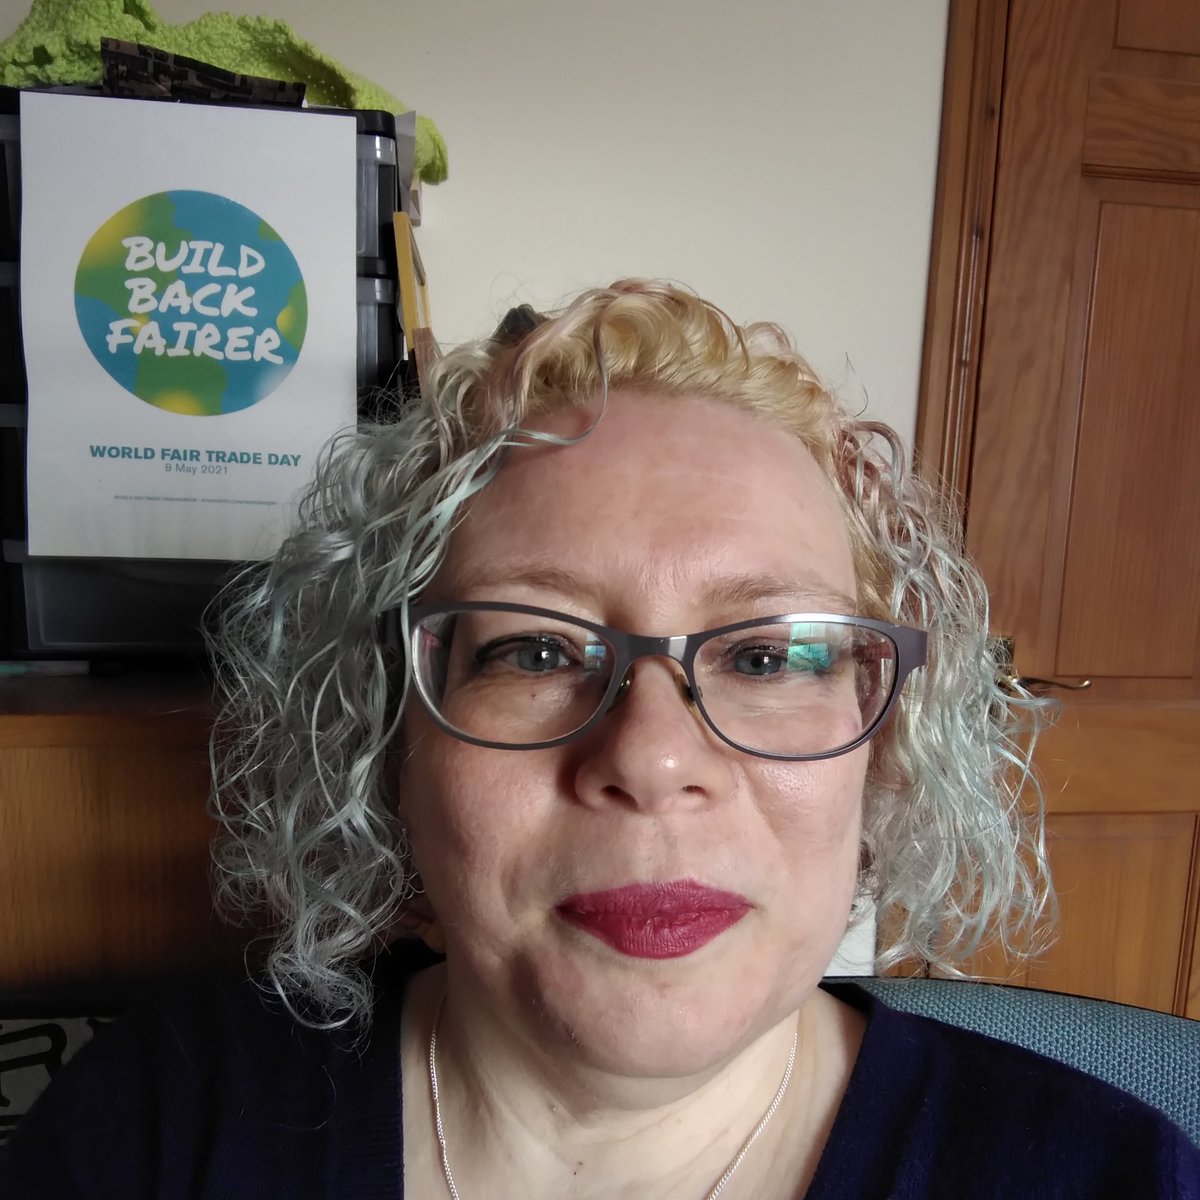 It's #WorldFairTradeDay and we're posting photos of ourselves with the motto #BuildBackFairer
Read our latest blog to find out how we can all come together to do it:
accessoryfair.co.uk/blog/world-fai…